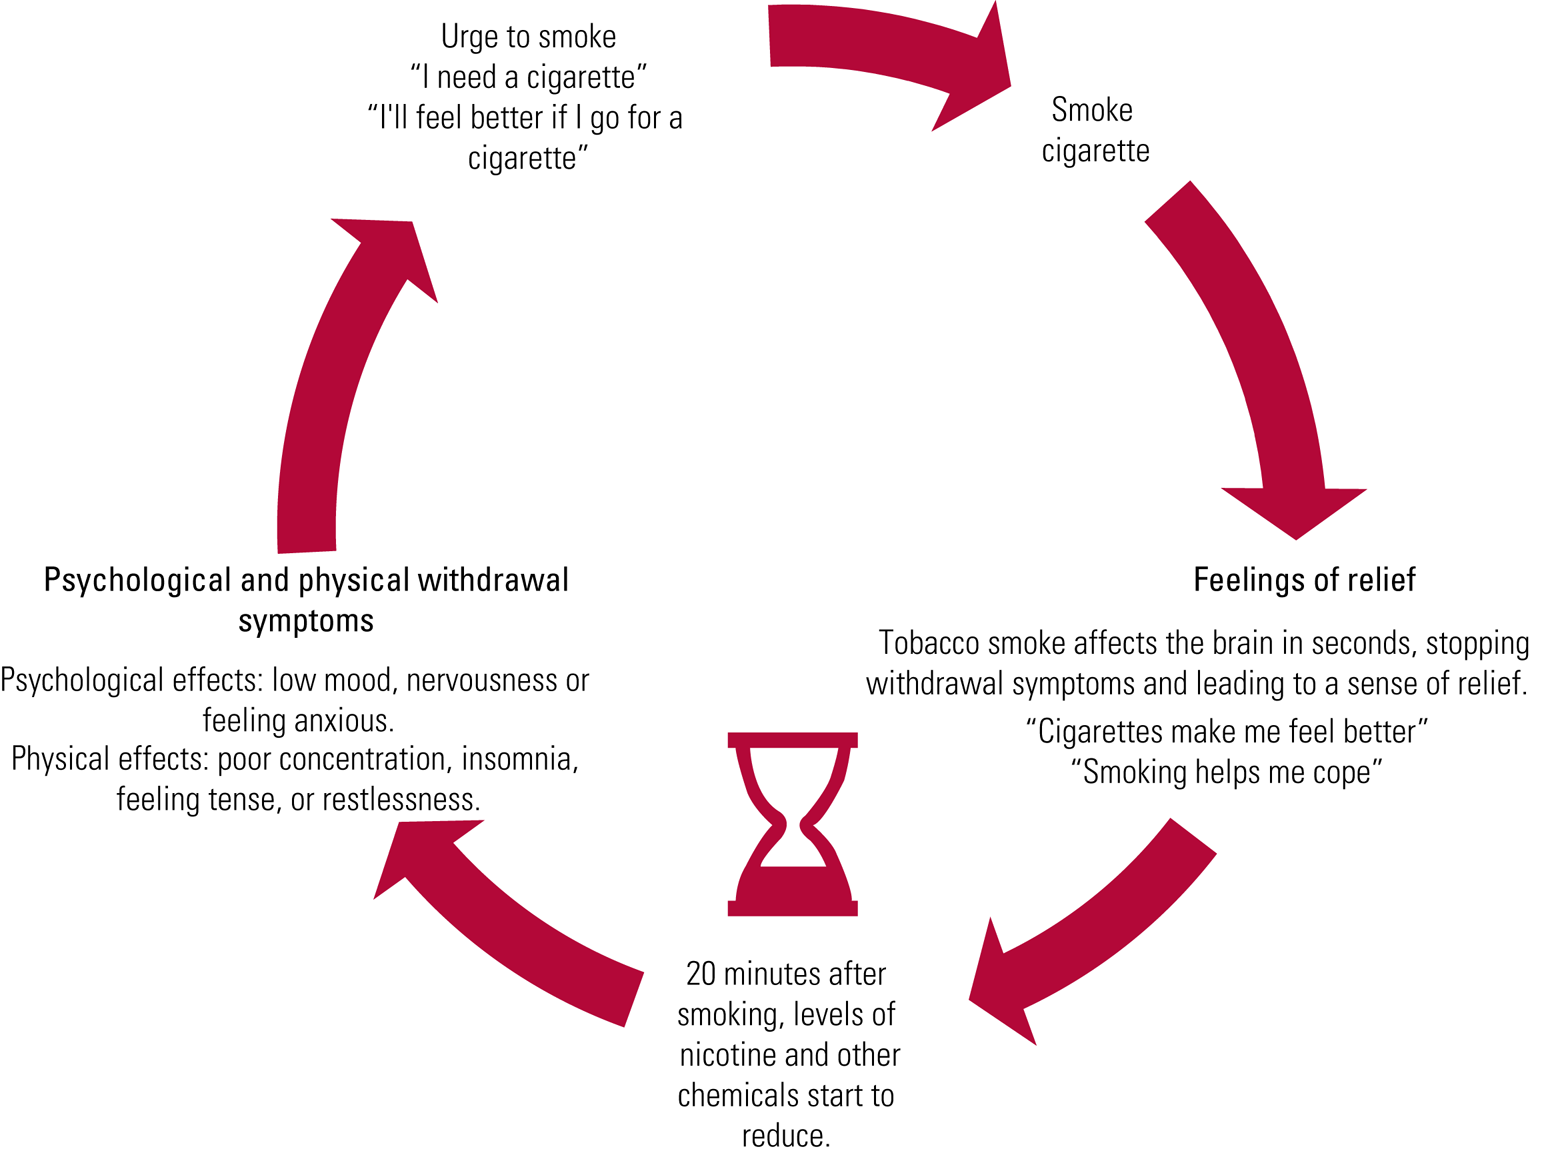 Linking emotional triggers for smoking with better addiction treatments -  PSU Institute for Computational and Data Sciences